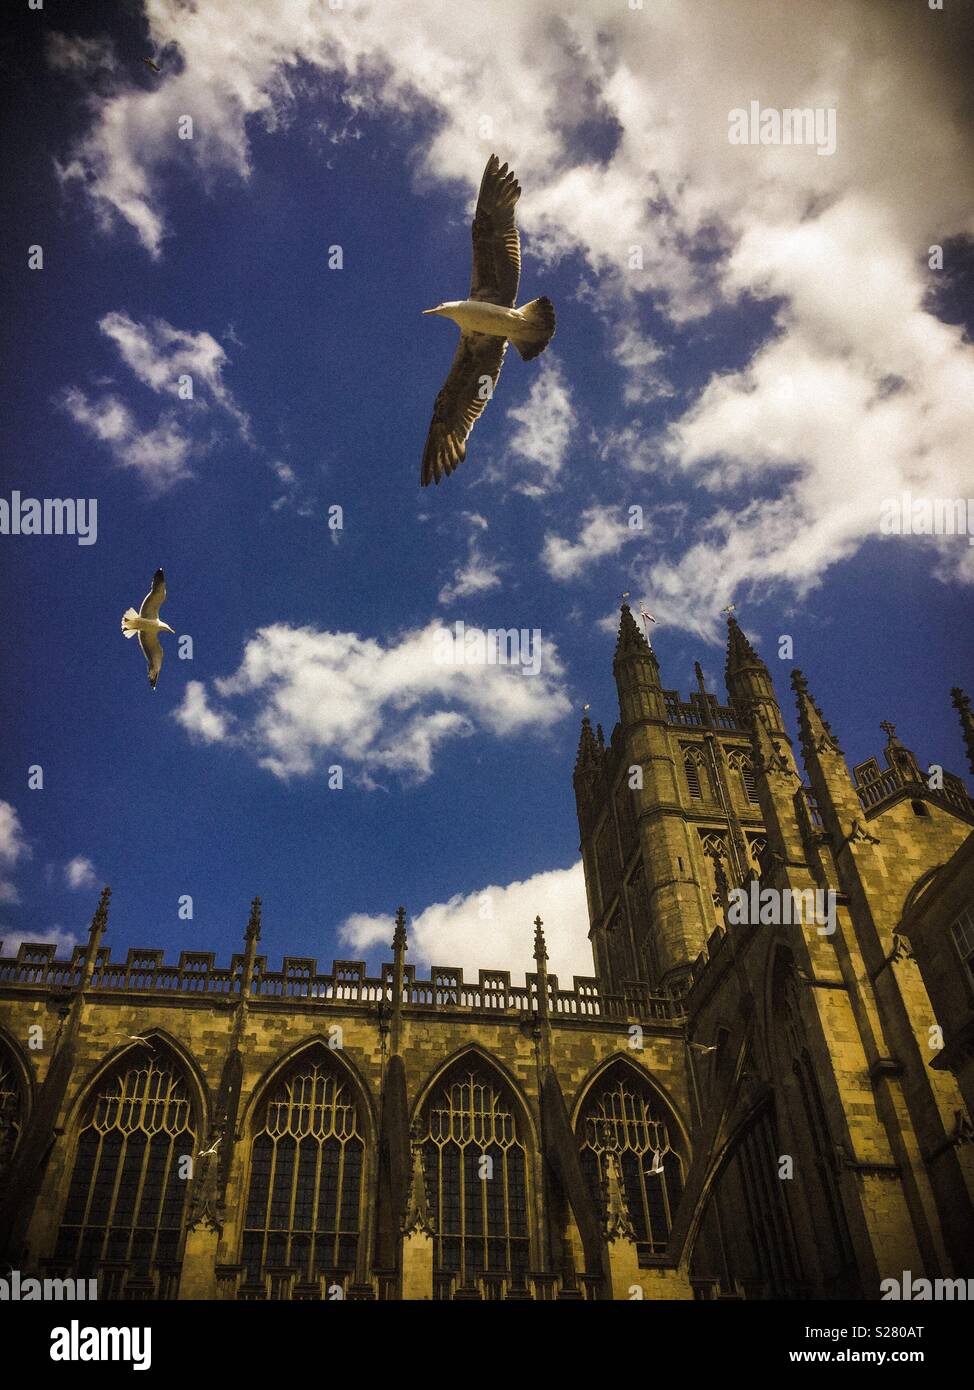 Seagulls flying in the blue and cloudy sky around Bath Abbey. Stock Photo